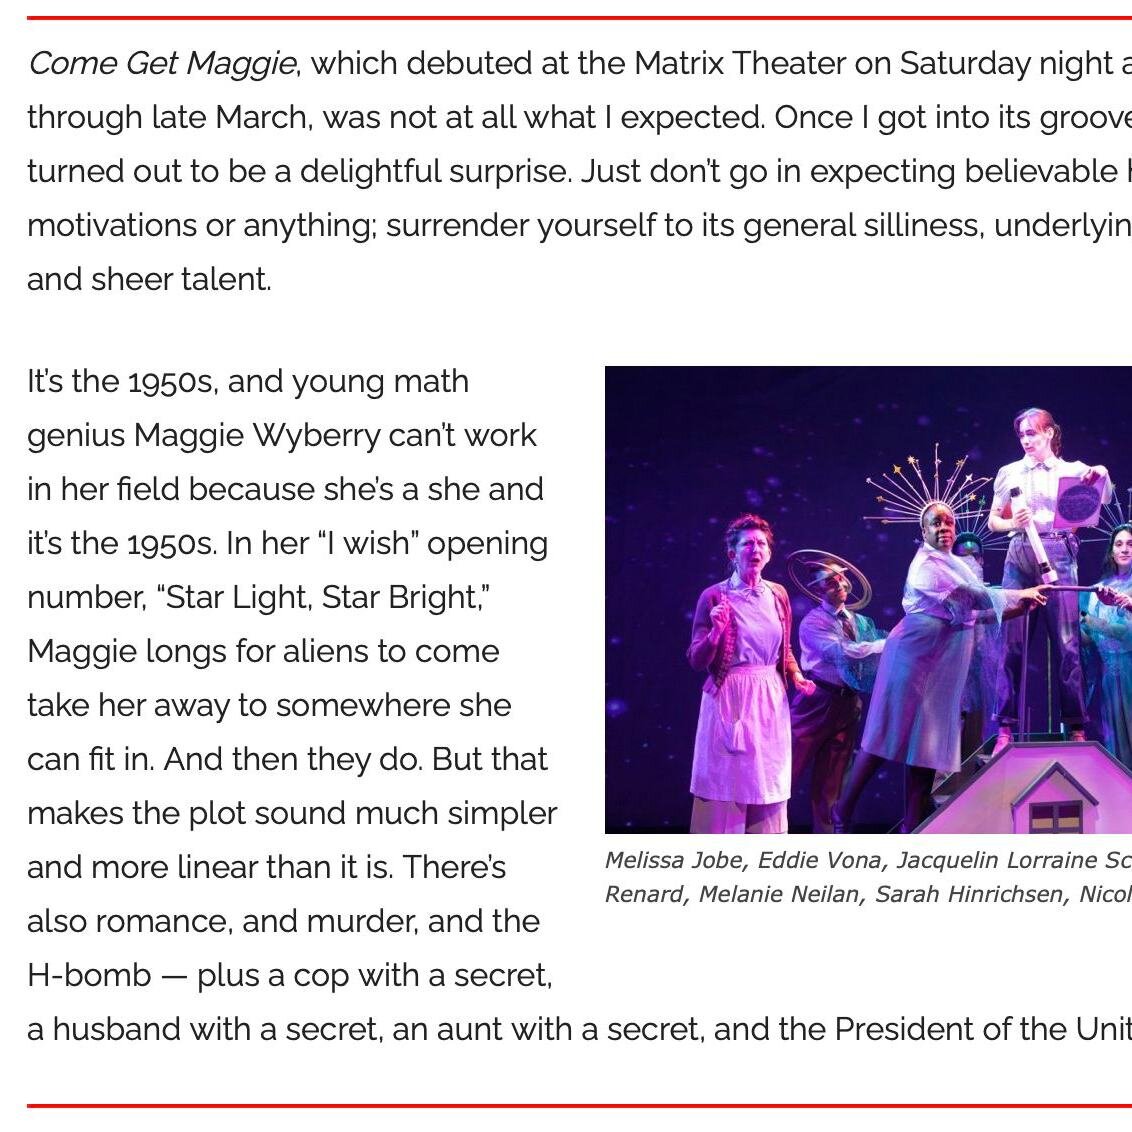 Lovely praise! Thank you @ethlieann &amp; @thehollywood.times 

Tickets now on sale at RogueMachine.Ludus.com 🛸👽🚀

#ComeGetMaggie #ComeGetMaggieMusical #musicaltheatre #musical #theatre #musicals #theater #dance #musicaltheater #singer #actor #act